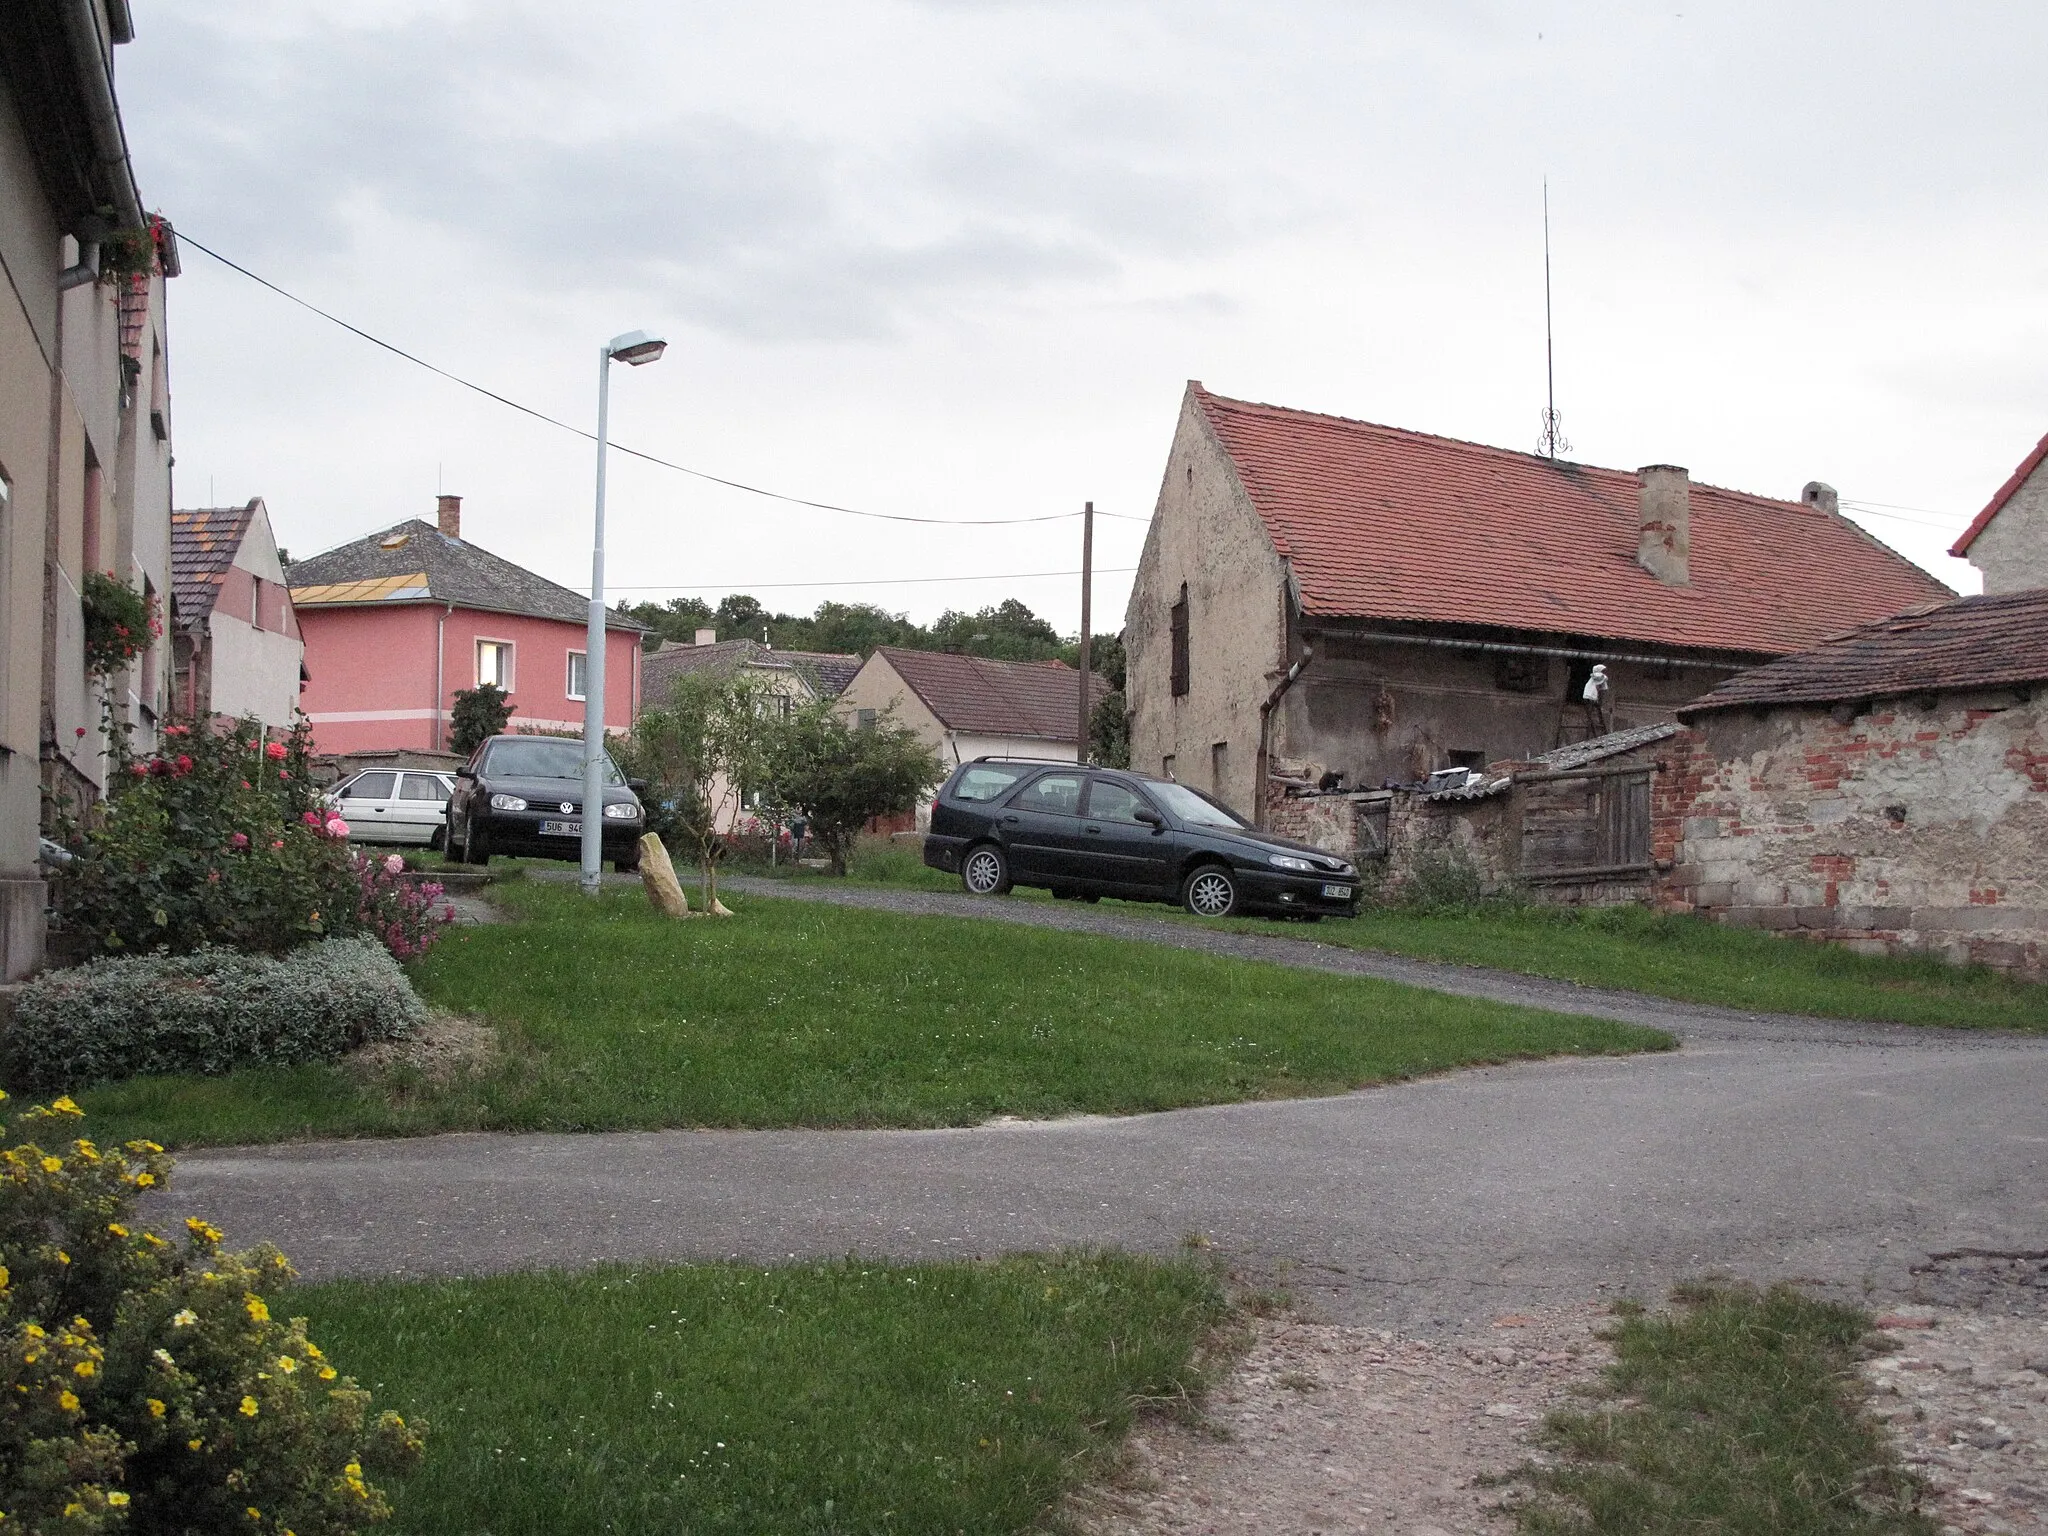 Photo showing: Houses and cars in Chodovlice village, Litoměřice district,  Czech Republic.